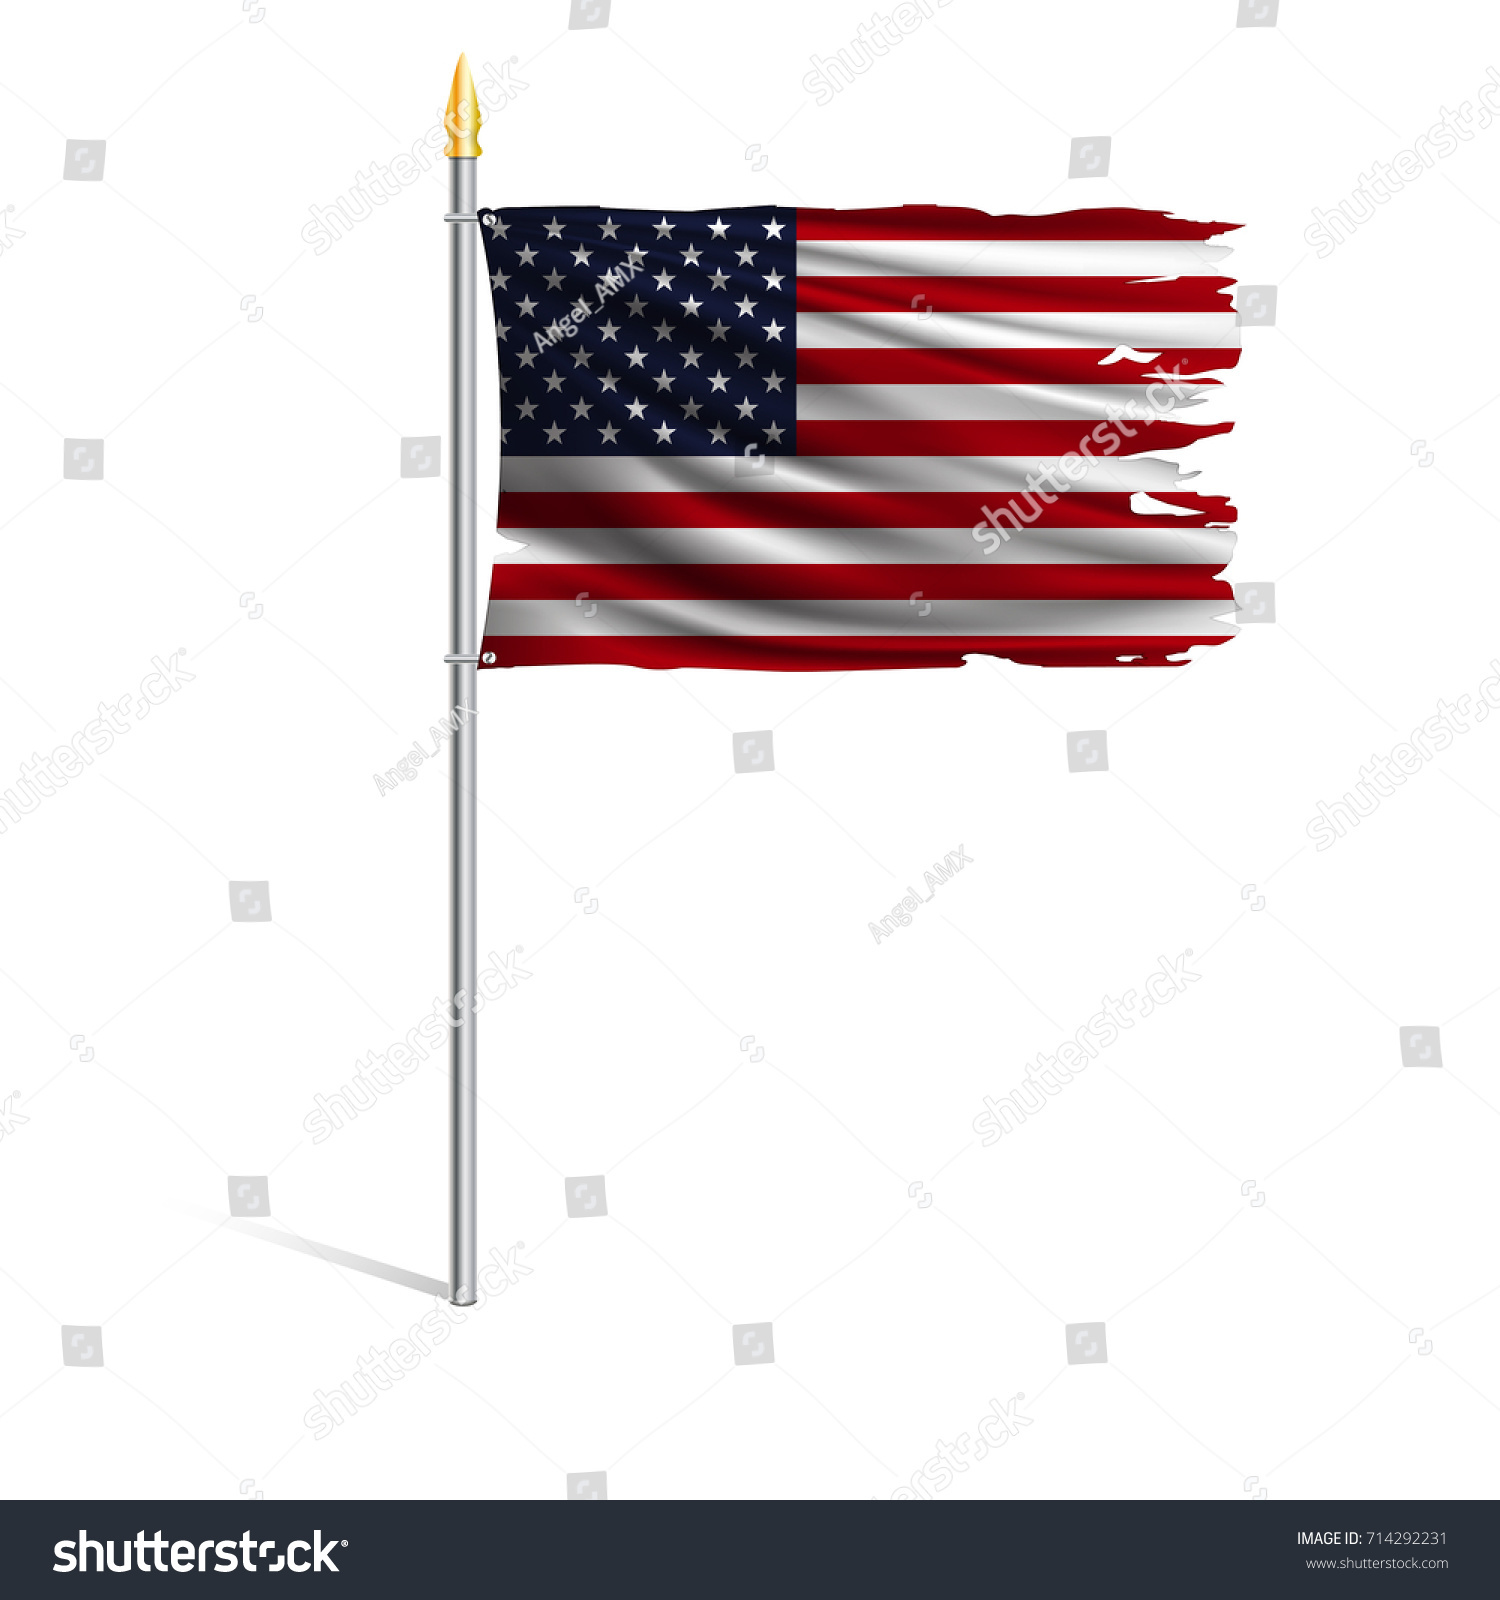 SVG of Hurricane torn national flag of the United States. The main symbol of the USA. Wind torn flag on metallic flagpole isolated on white background. Realistic vector illustration. svg